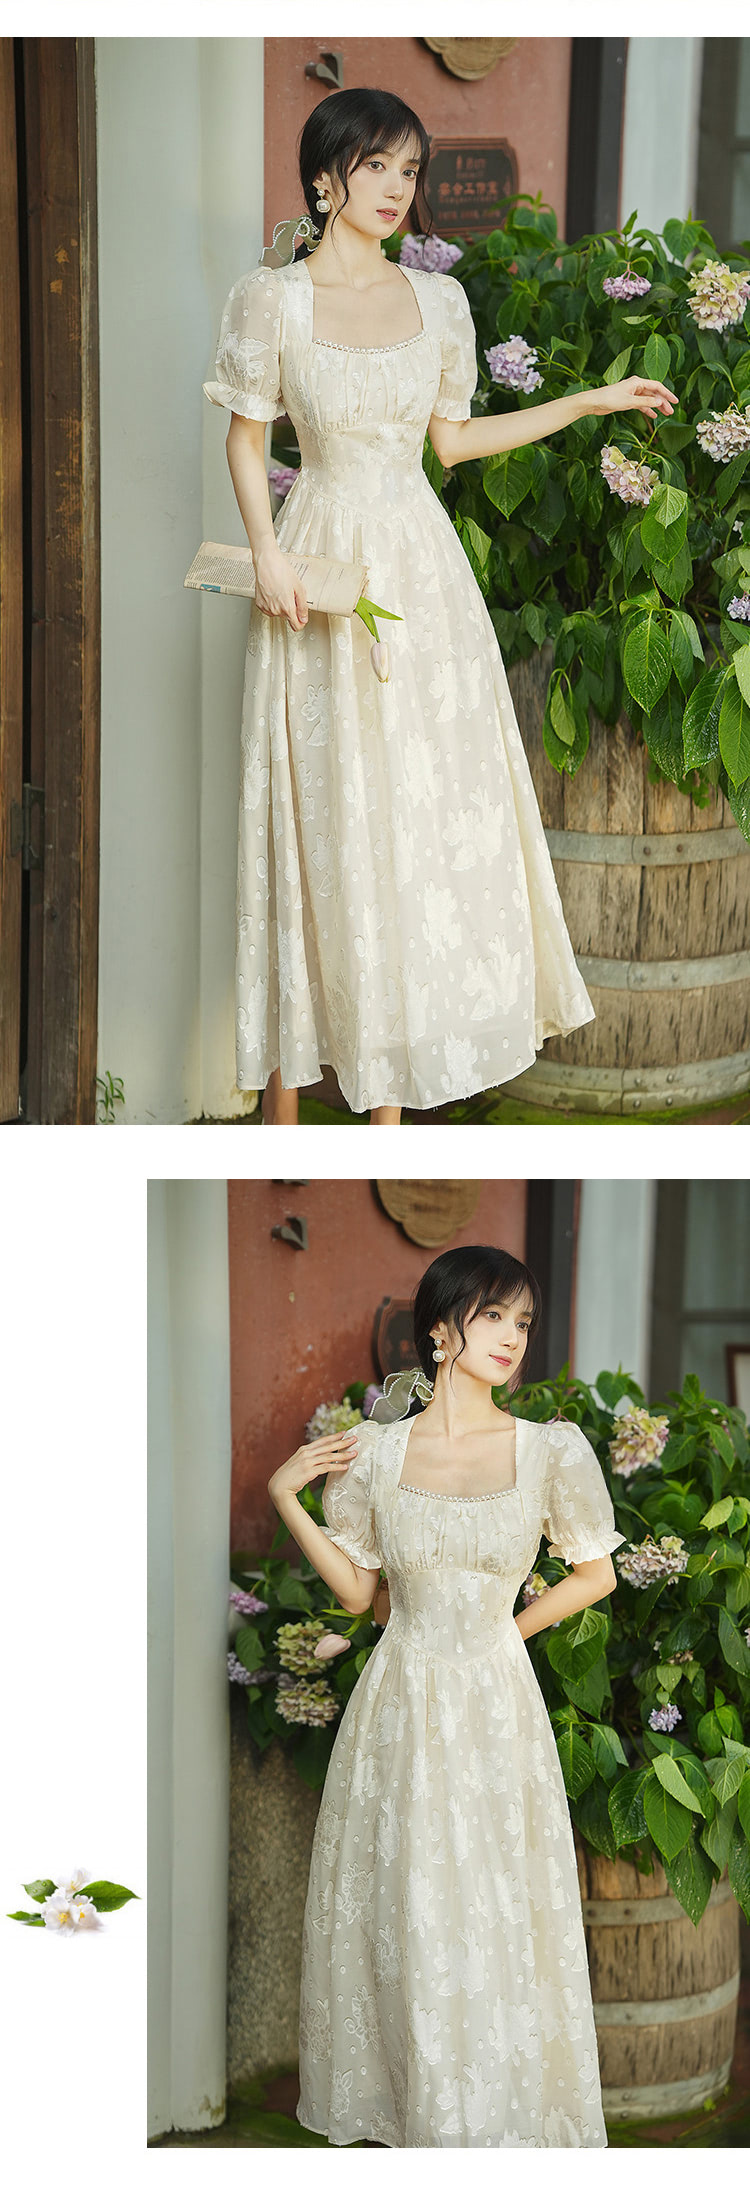 Modest-Sweet-Square-Neck-Short-Puff-Sleeve-Casual-Summer-Dress